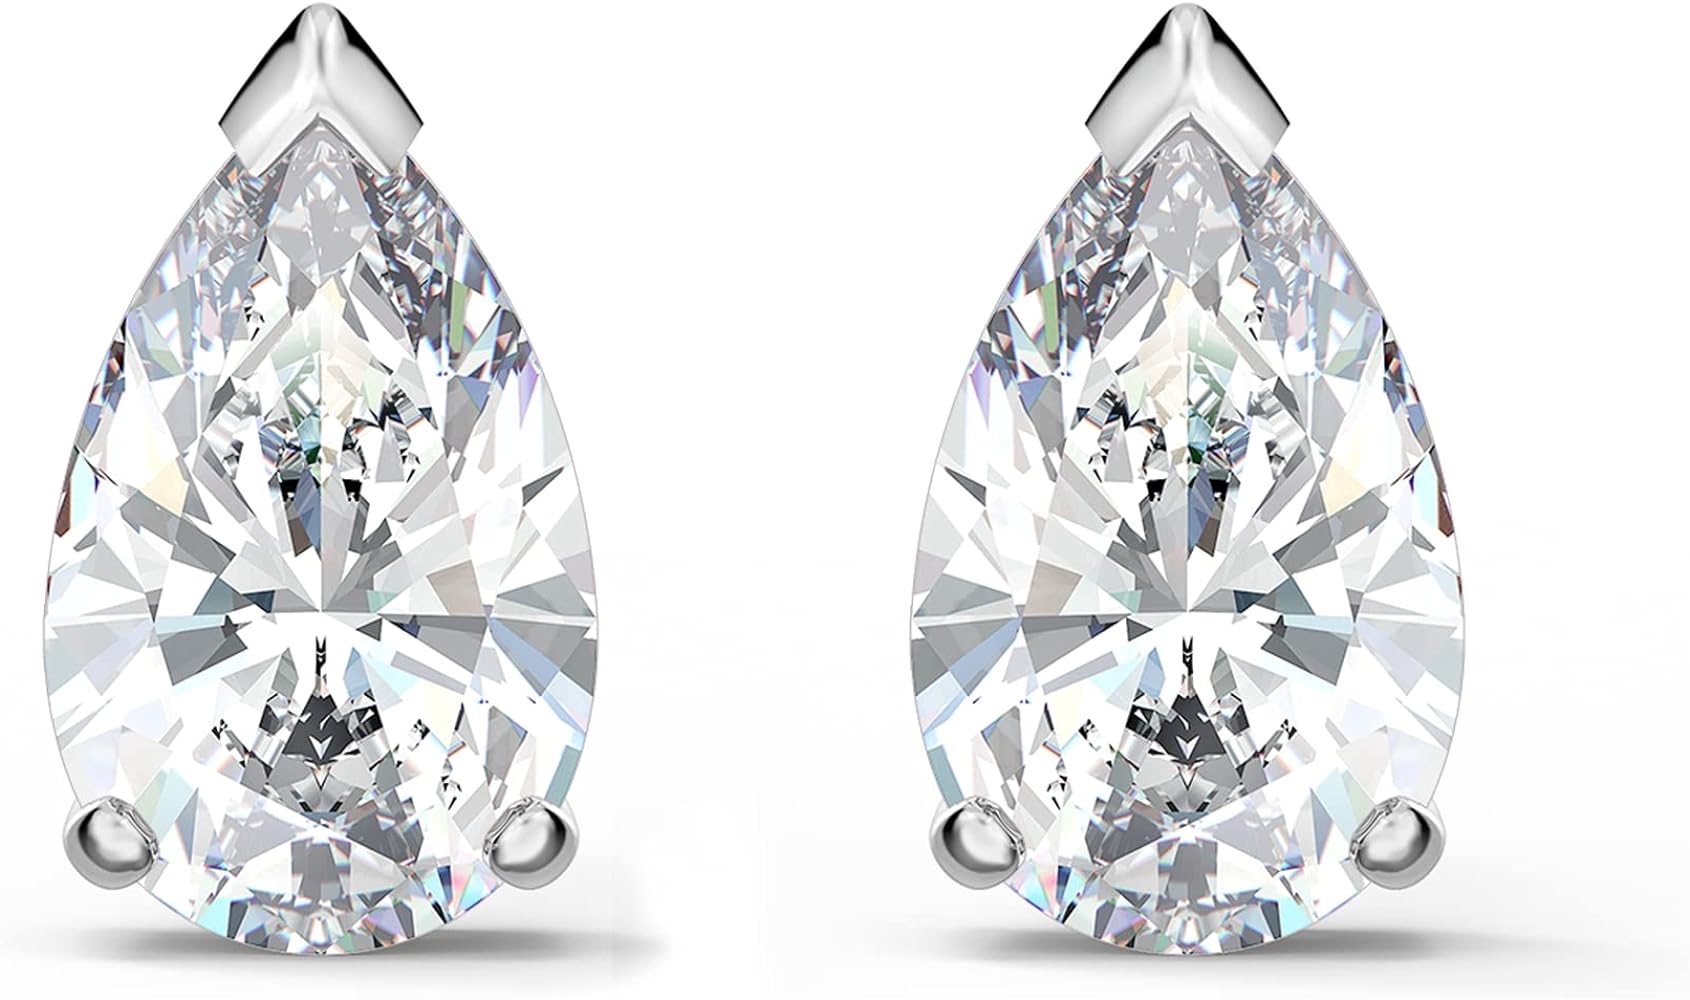 Amazon.com: Swarovski Attract Stud Earrings, Clear Drop-Cut Stones in a Rhodium-Finished Setting, Part of the Swarovski Attract Collection : Clothing, Shoes & Jewelry